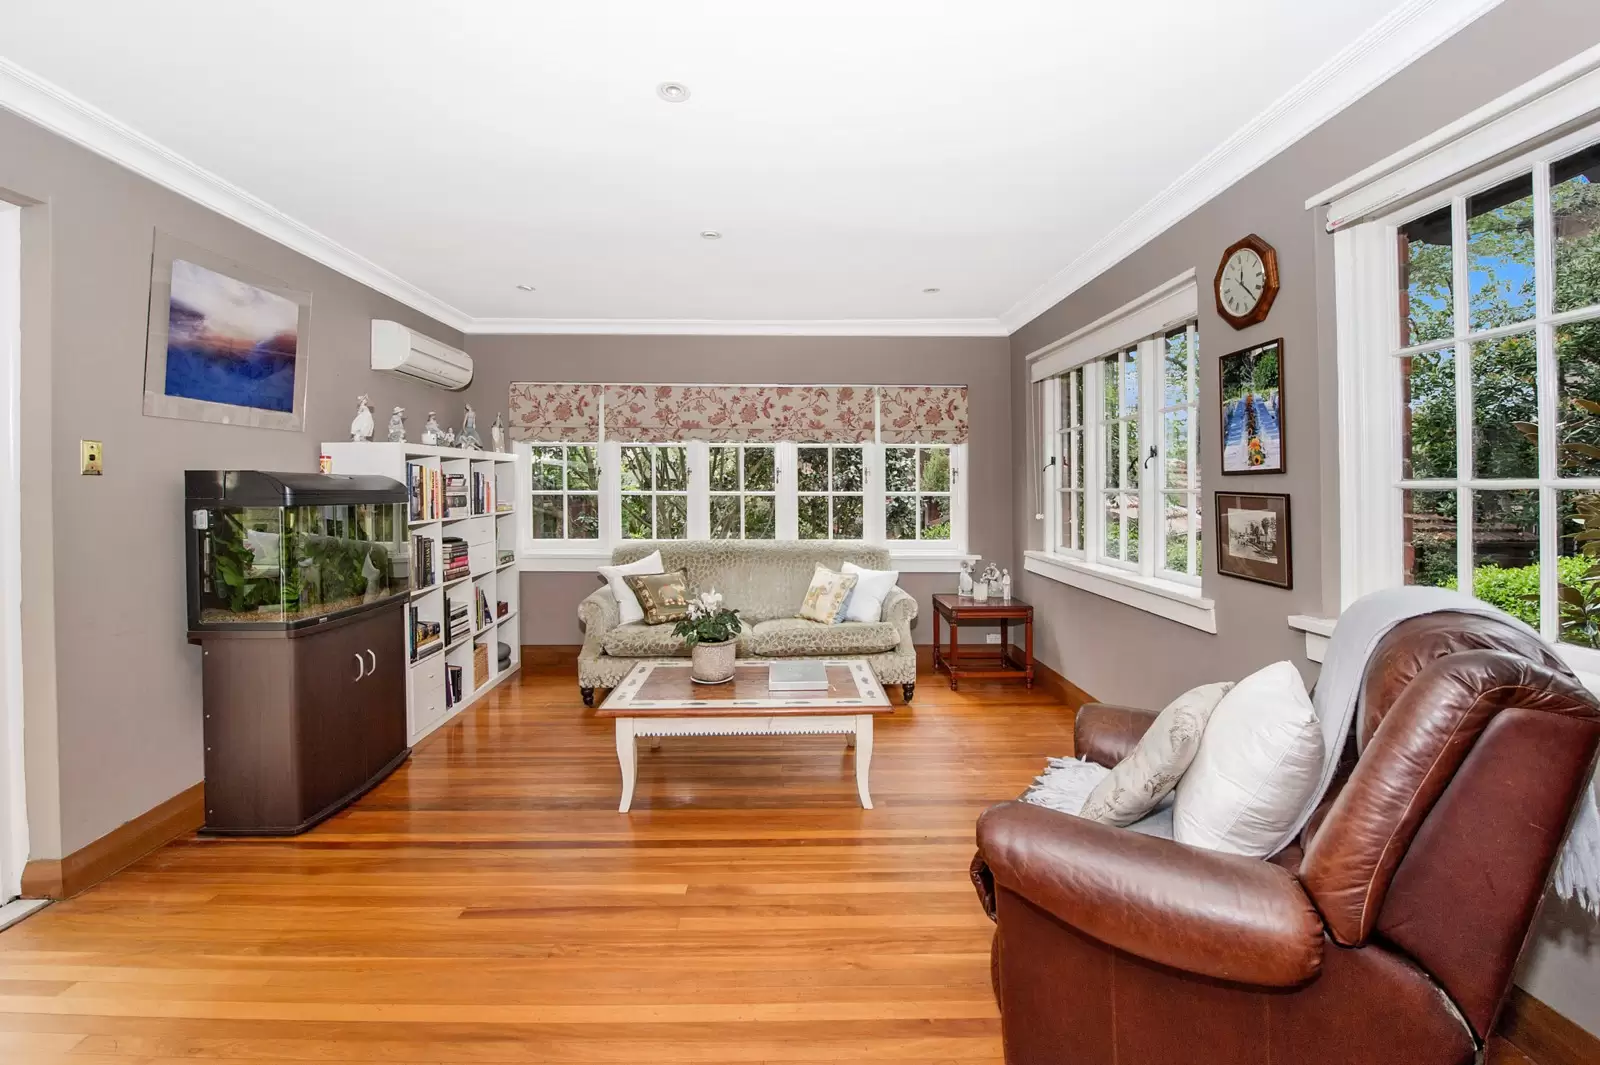 Photo #5: 8 Glencoe Road, Woollahra - Sold by Sydney Sotheby's International Realty